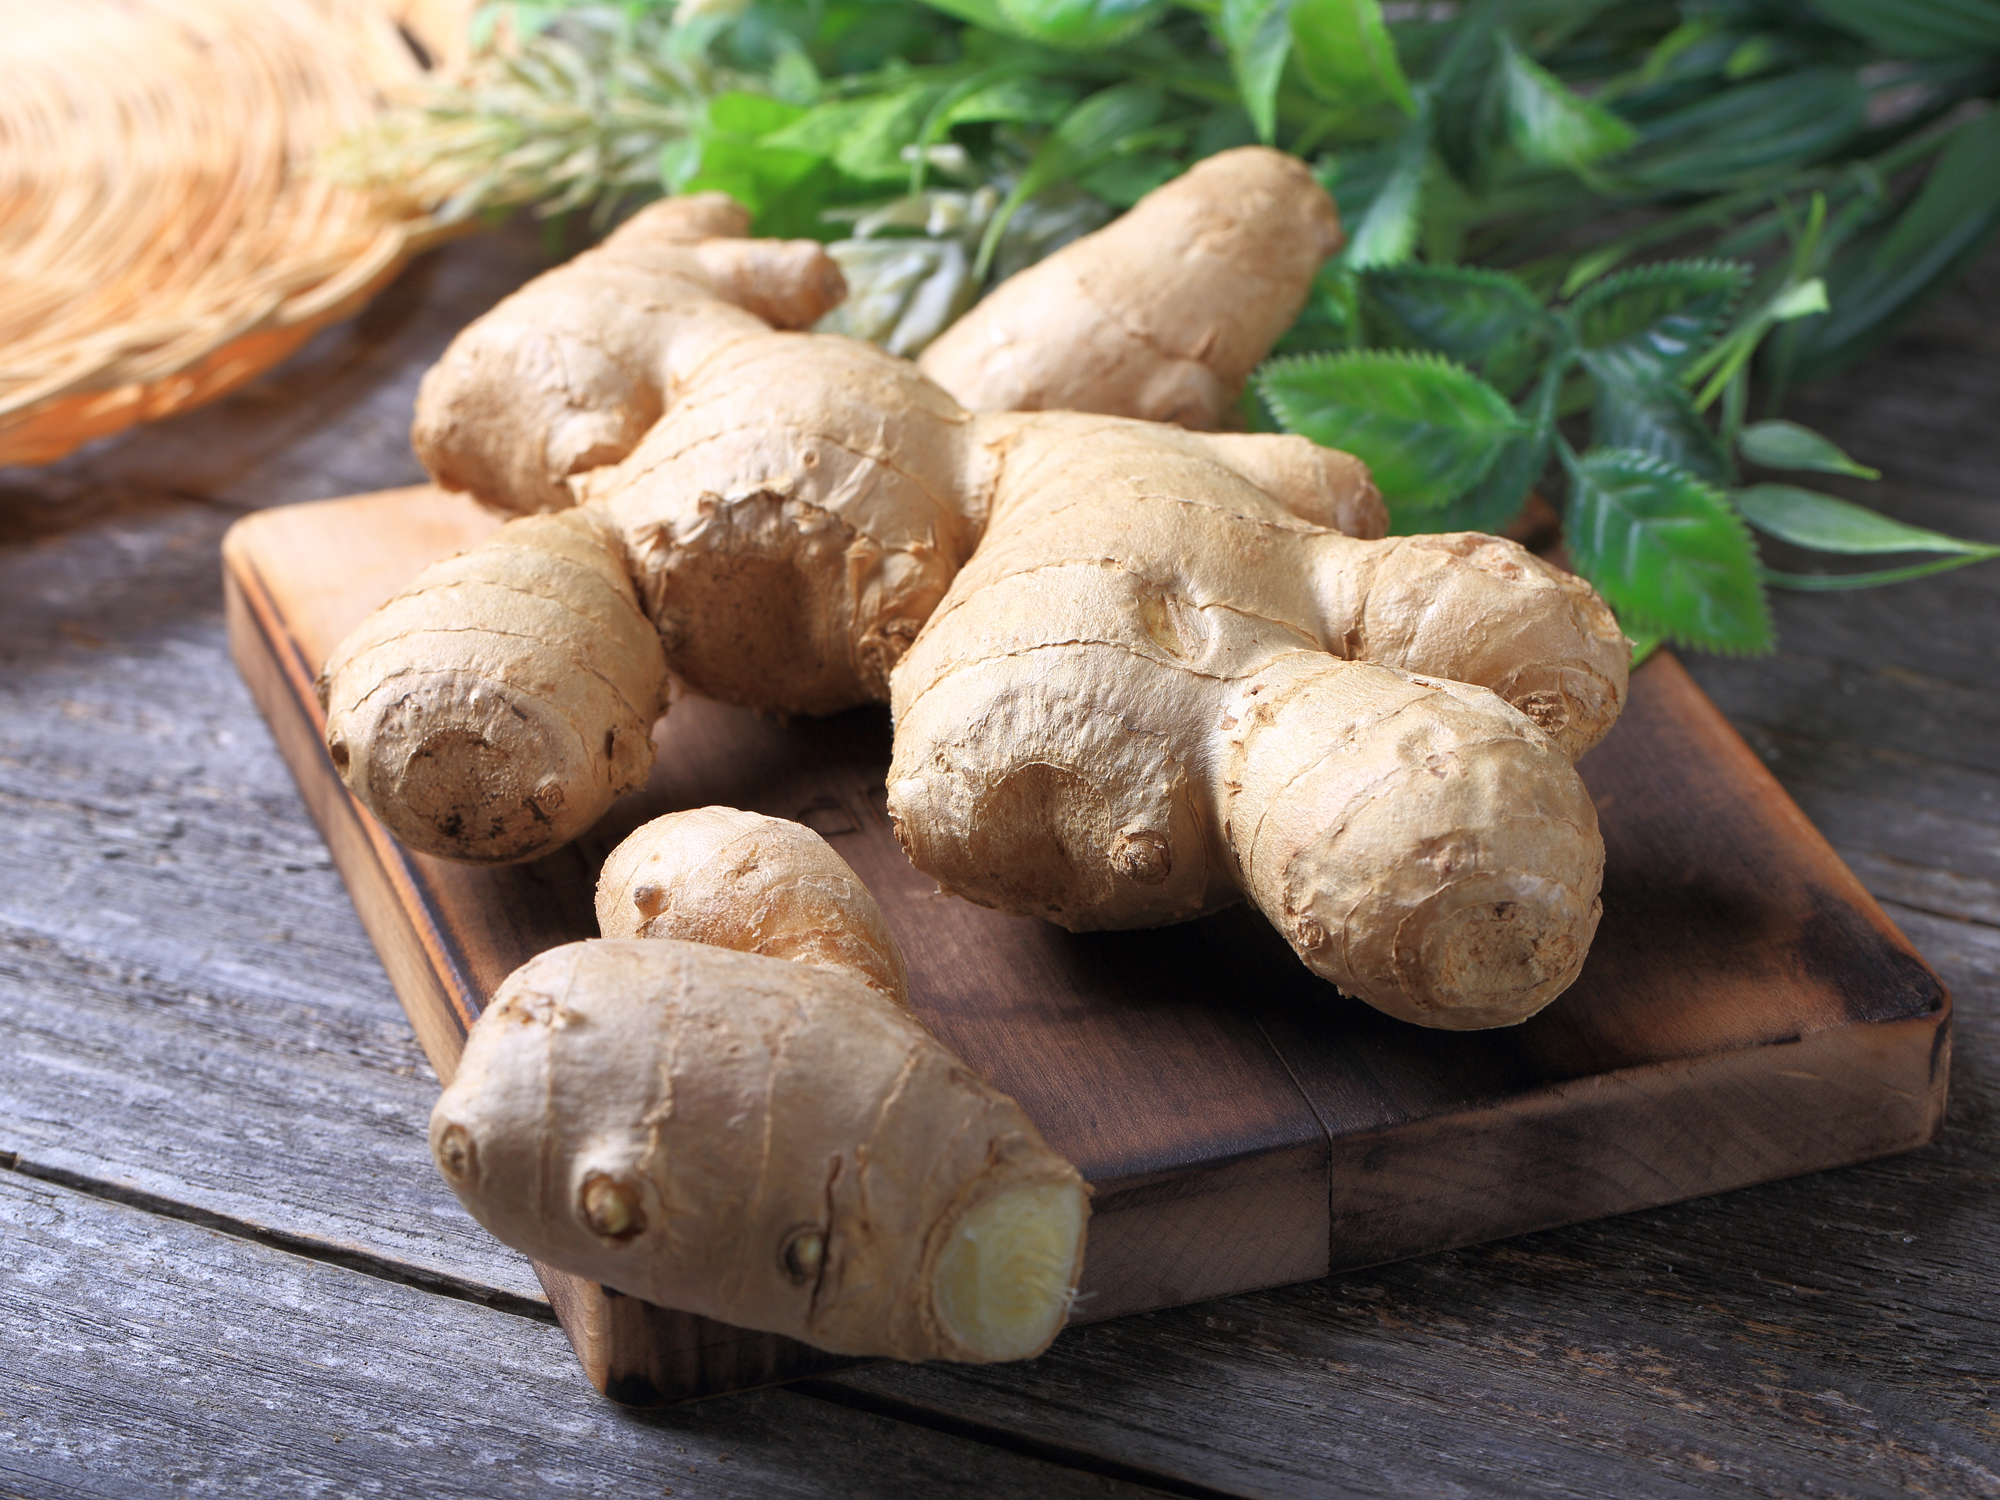 What the doctor wants you to know about ginger’s benefits